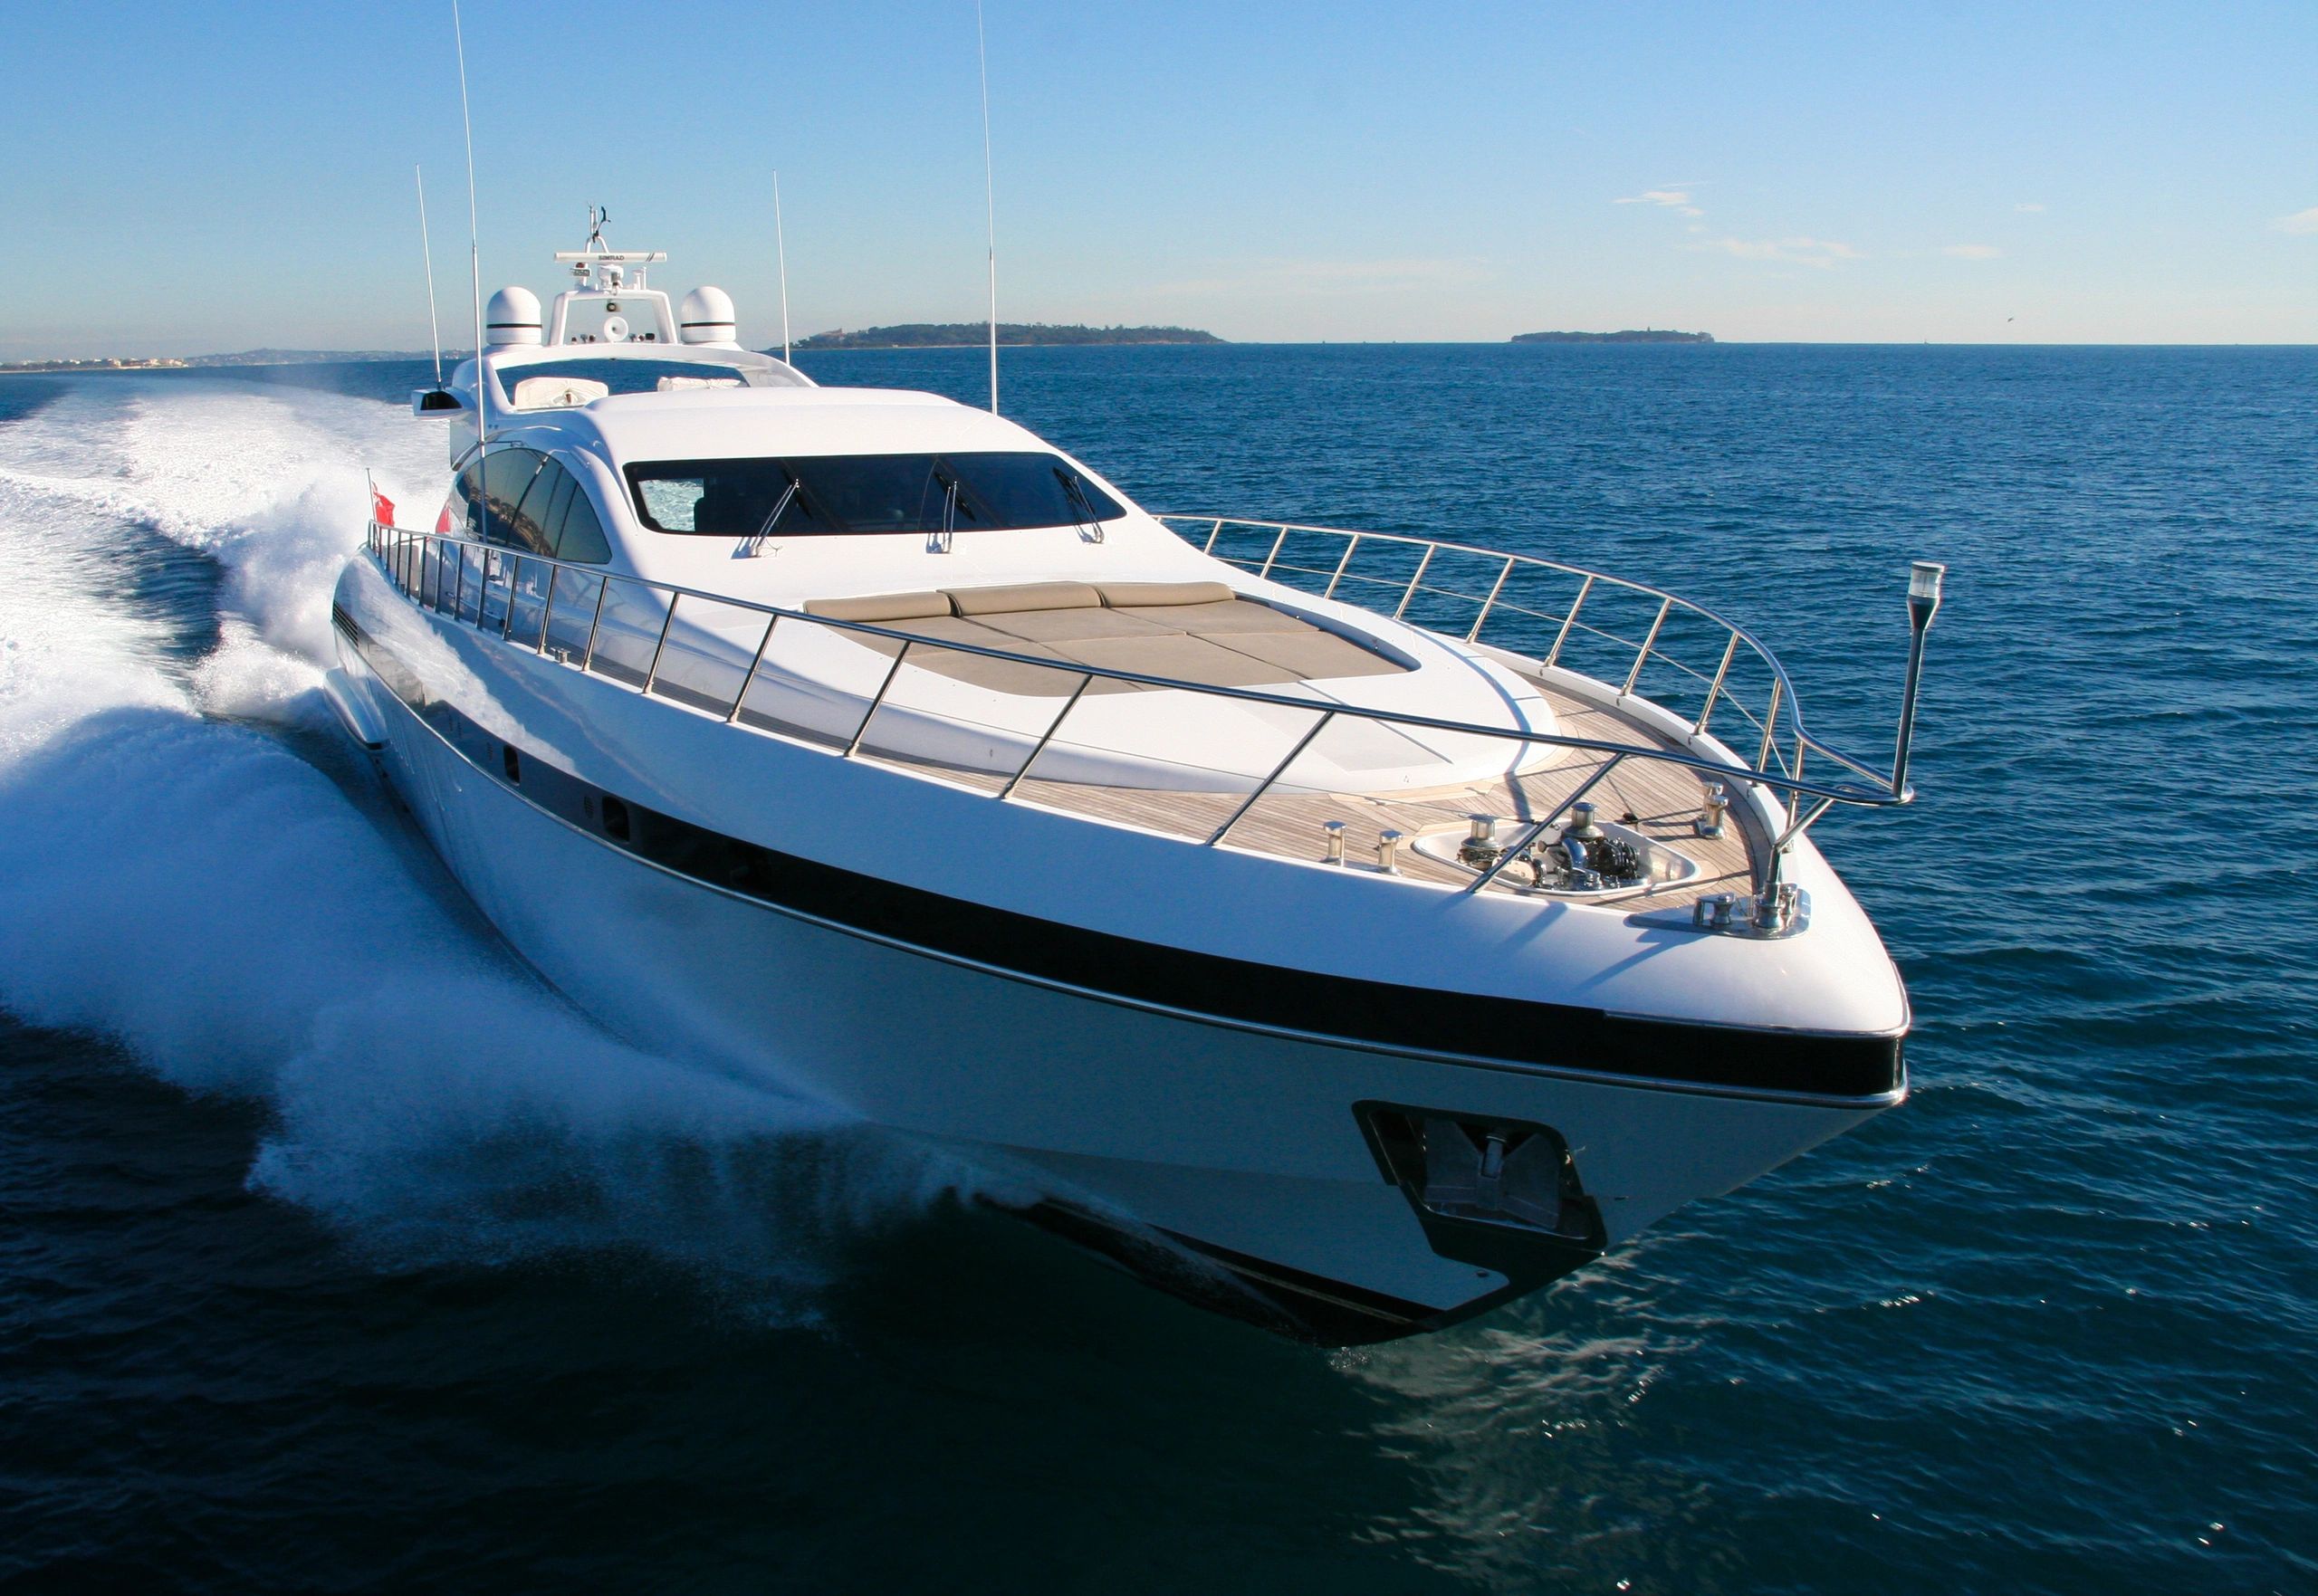 rock solid yacht services